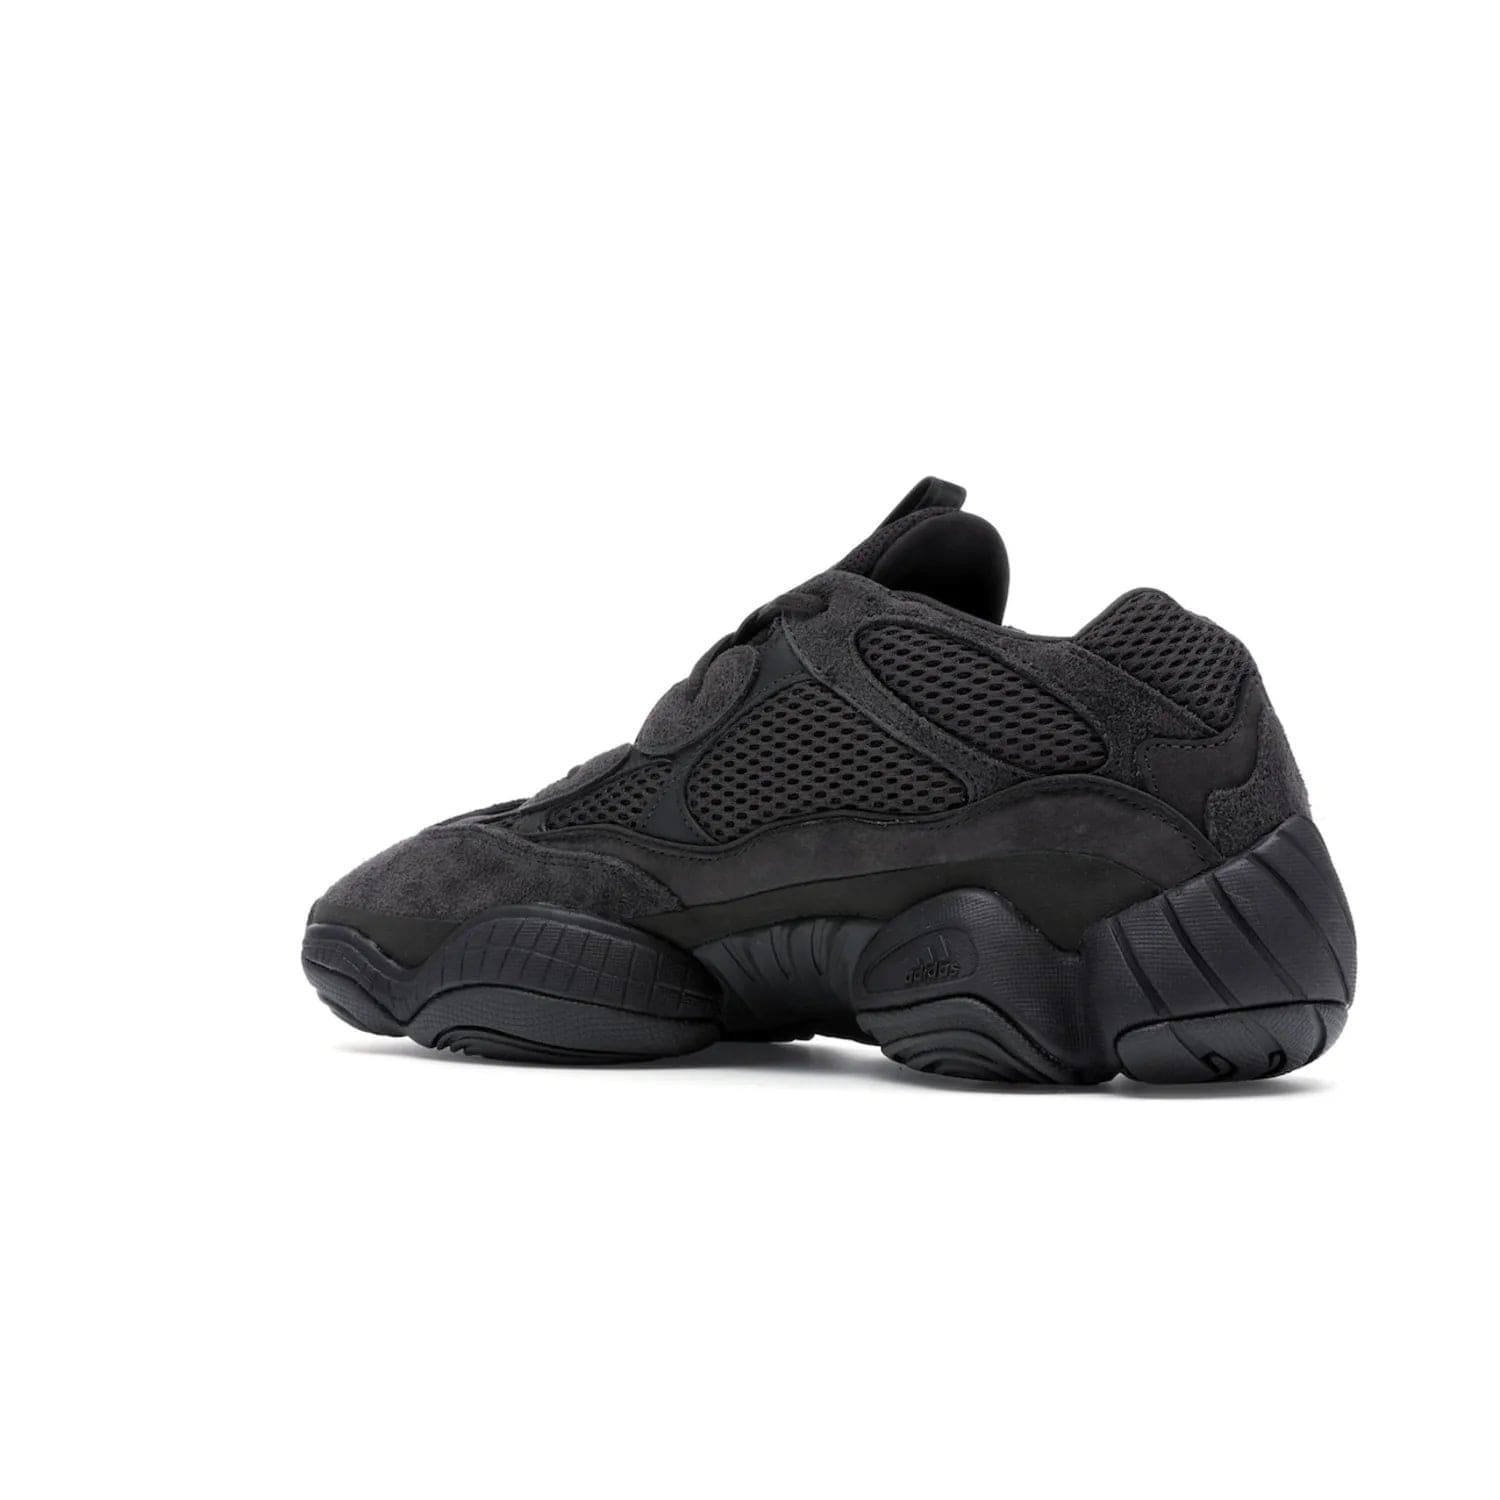 adidas Yeezy 500 Utility Black - Image 23 - Only at www.BallersClubKickz.com - Iconic adidas Yeezy 500 Utility Black in All-Black colorway. Durable black mesh and suede upper with adiPRENE® sole delivers comfort and support. Be unstoppable with the Yeezy 500 Utility Black. Released July 2018.